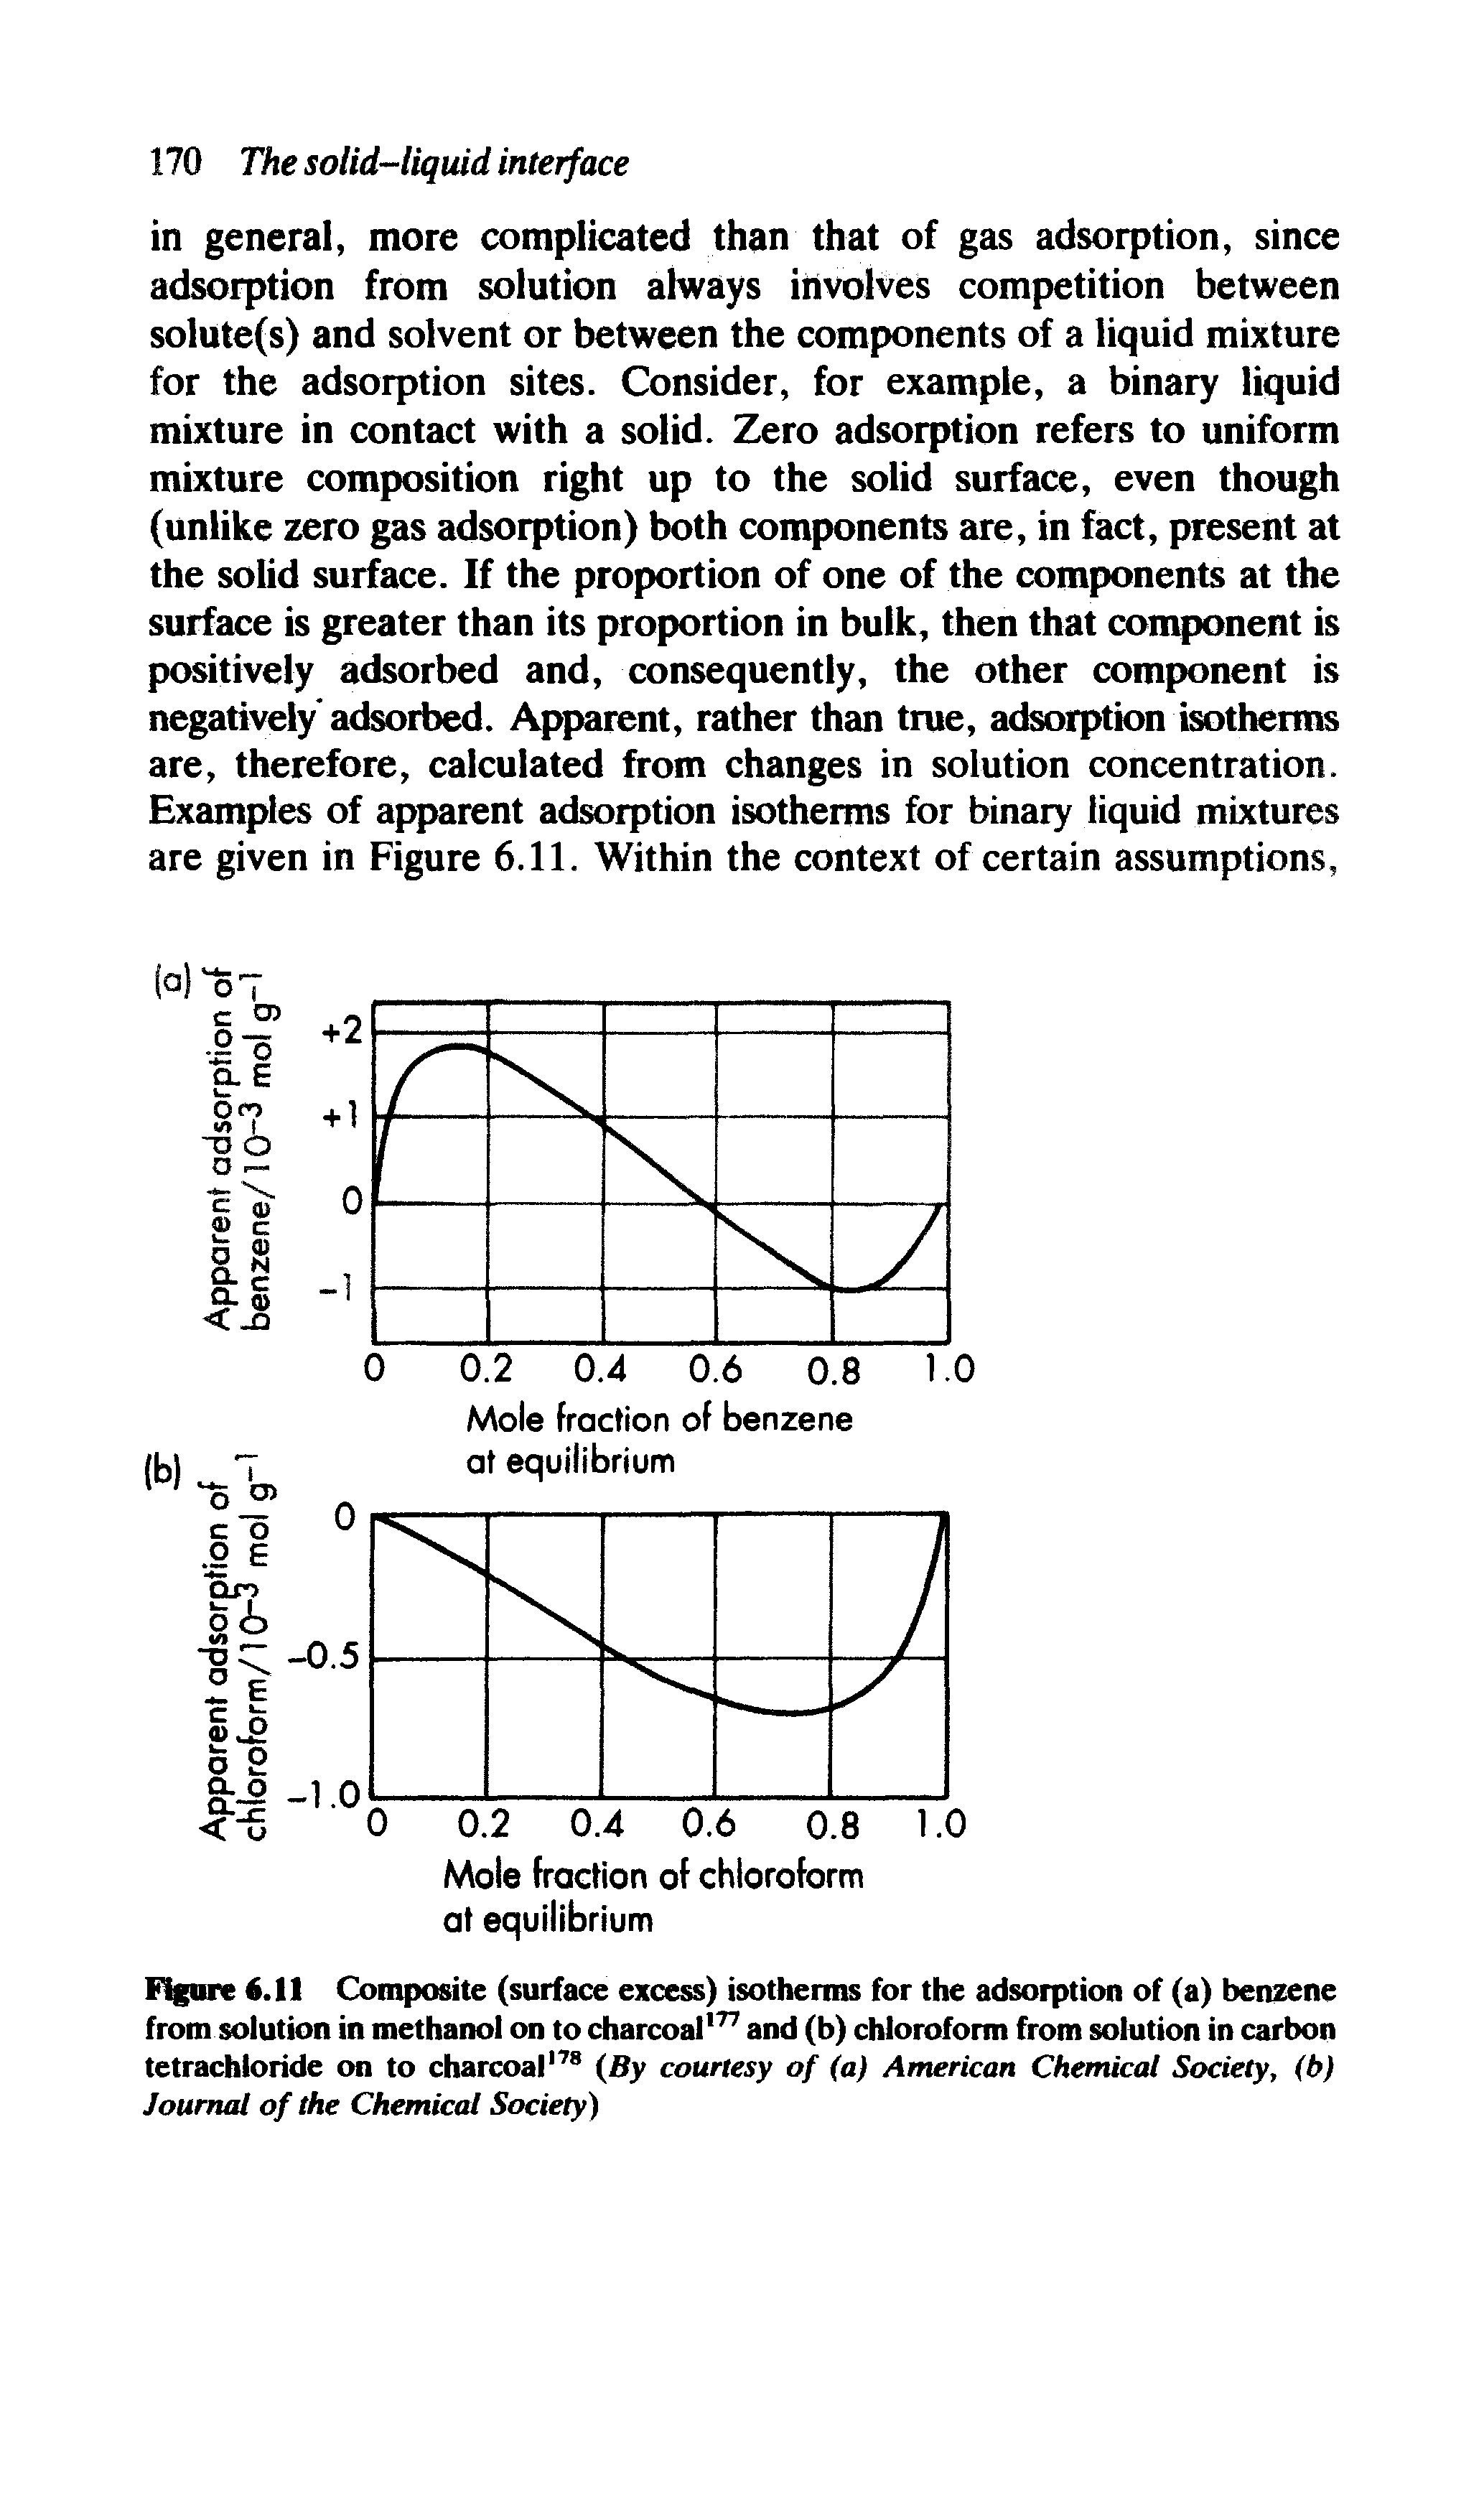 Figure 6.11 Composite (surface excess) isotherms for the adsorption of (a) benzene from solution in methanol on to charcoal177 and (b) chloroform from solution in carbon tetrachloride on to charcoal178 (By courtesy of (a) American Chemical Society, (b) Journal of the Chemical Society)...